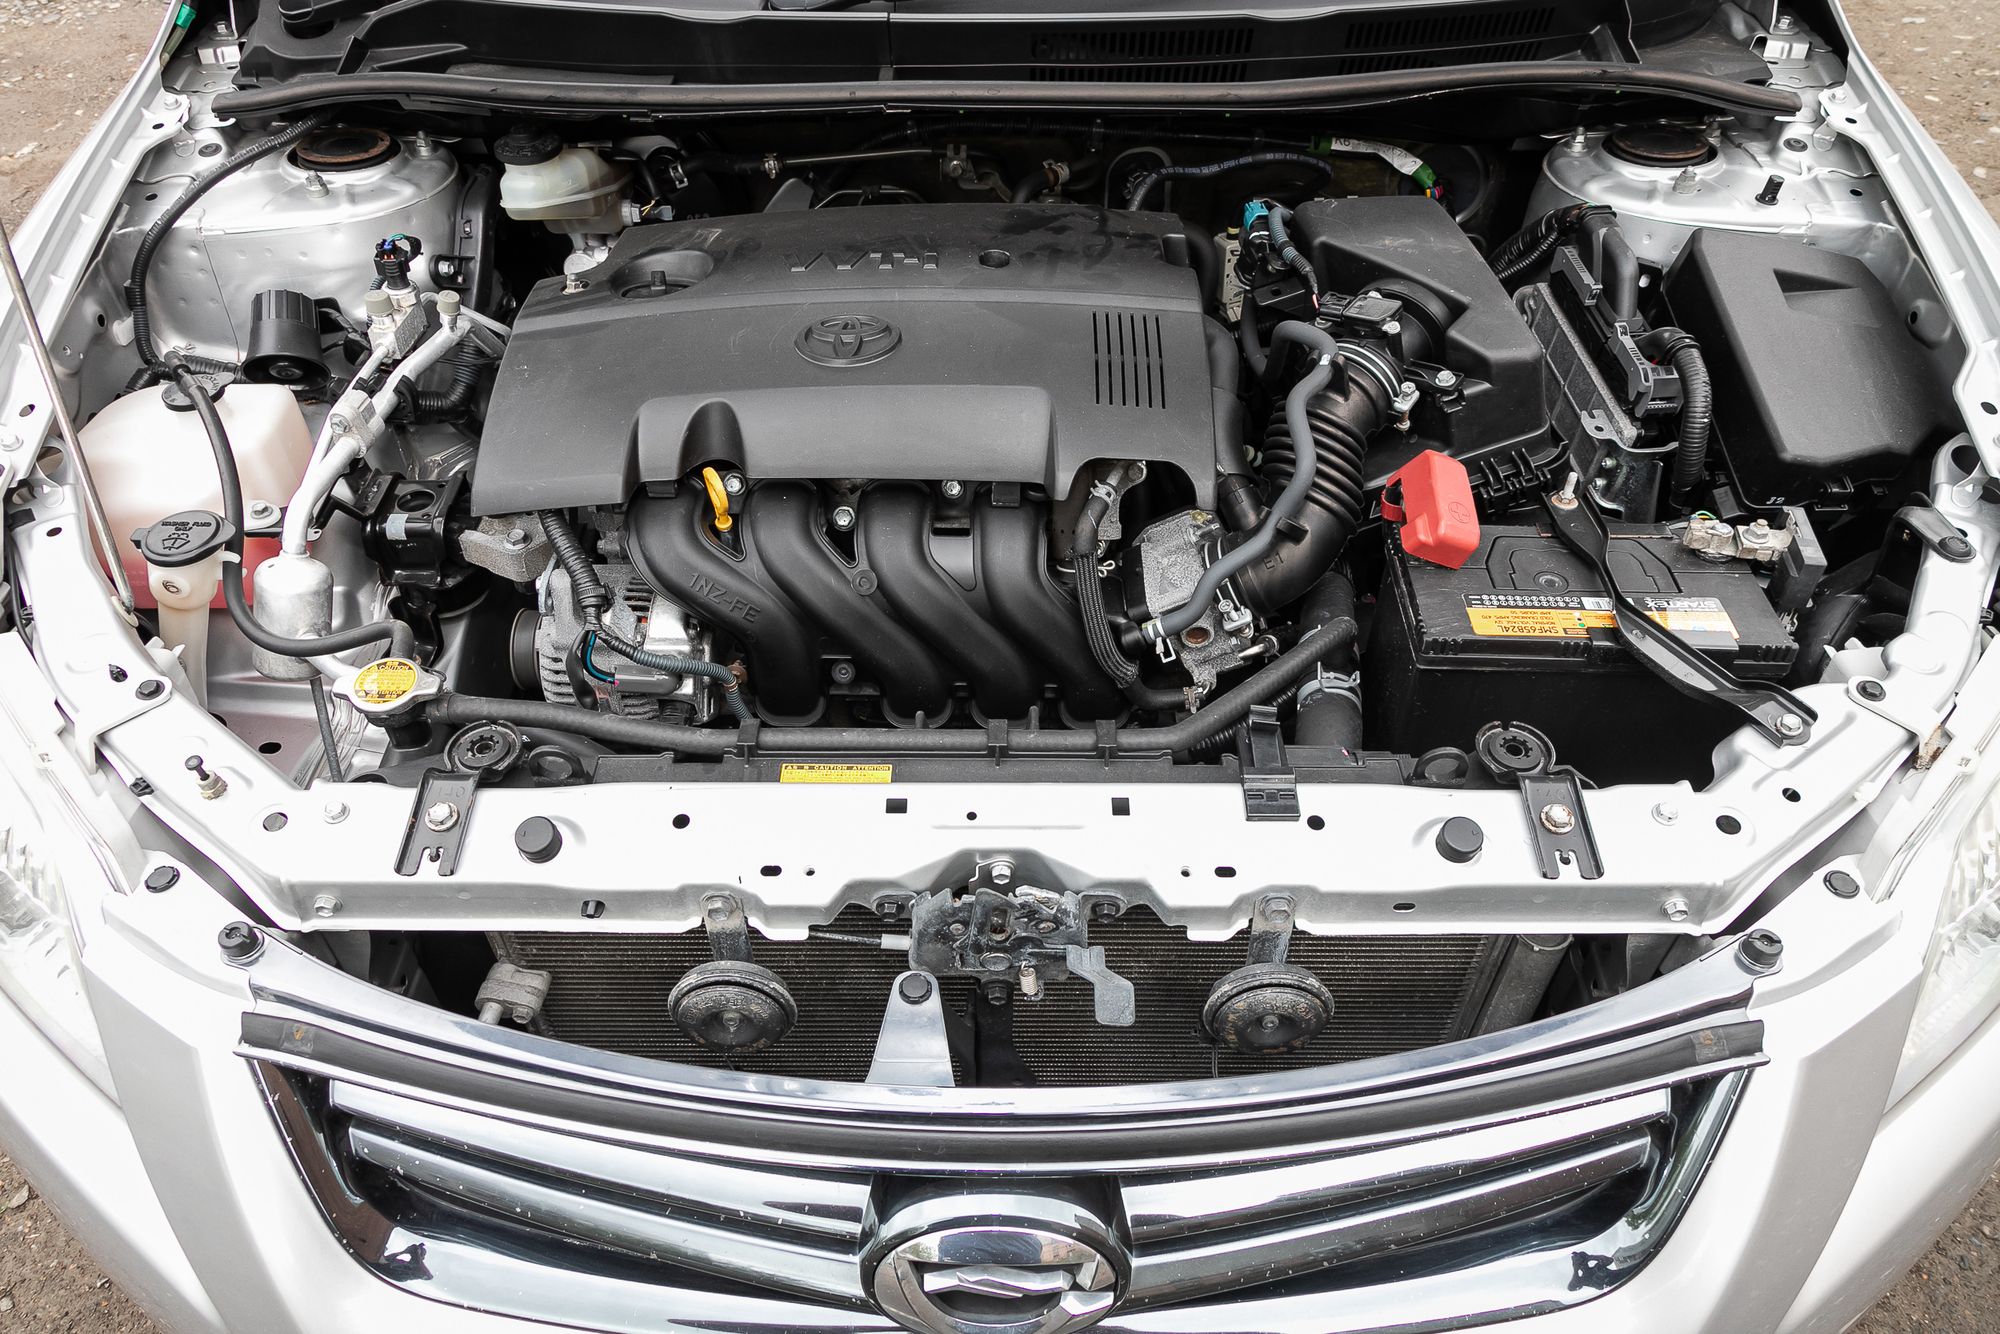 What Is The Average Lifespan Of A Car's Engine?